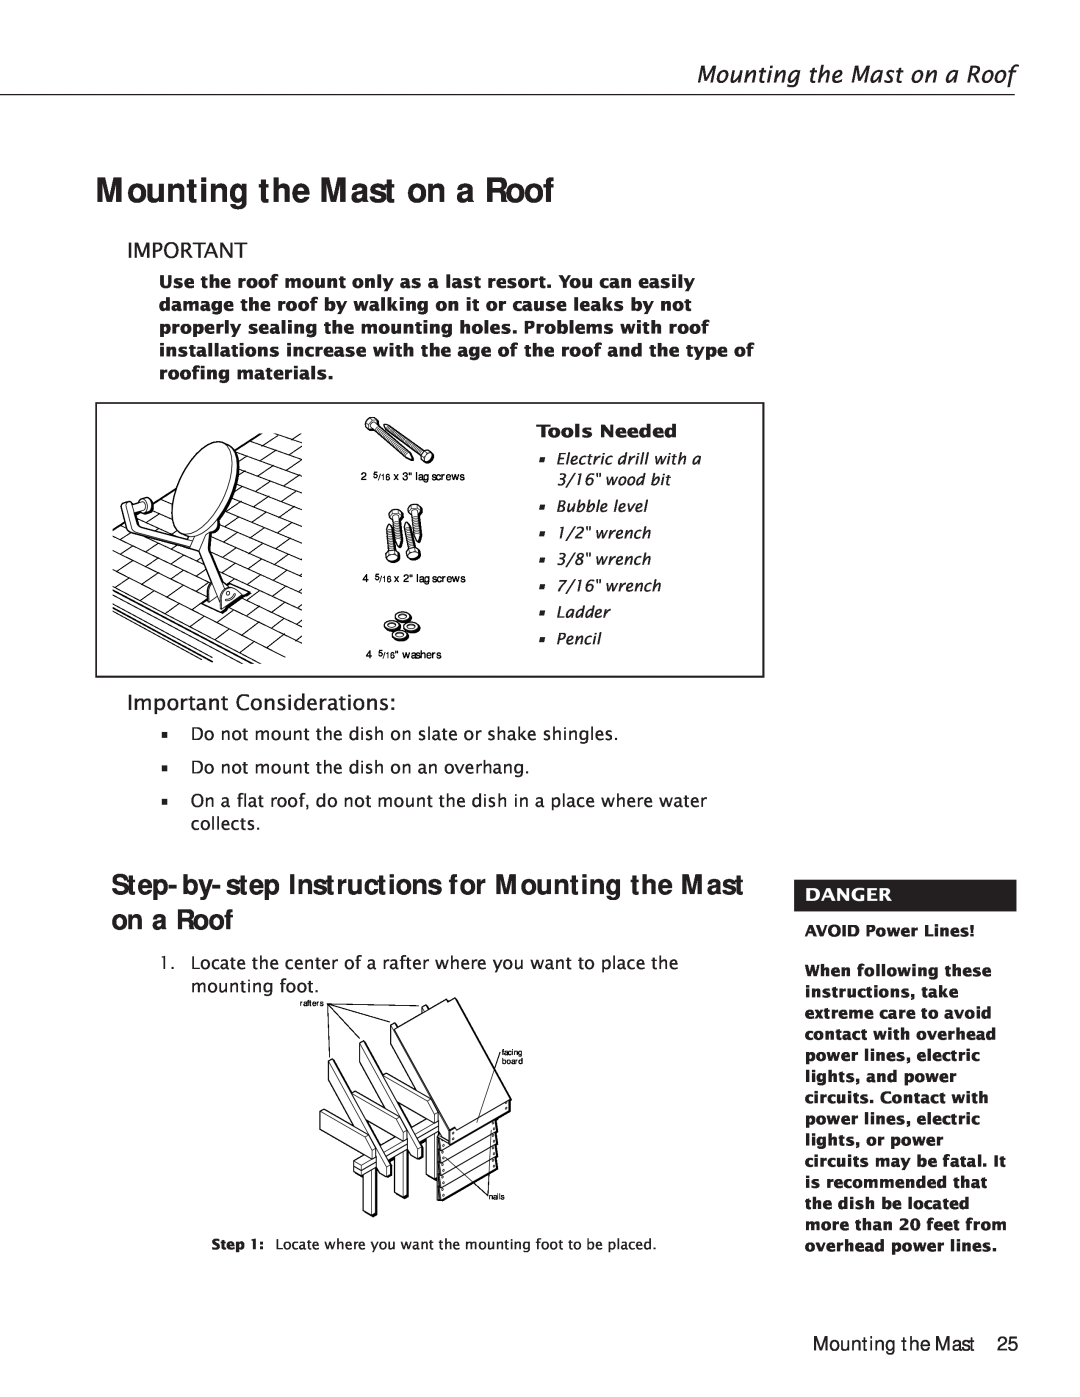 RCA Satellite TV Antenna Step-by-step Instructions for Mounting the Mast on a Roof, Important Considerations, Danger 